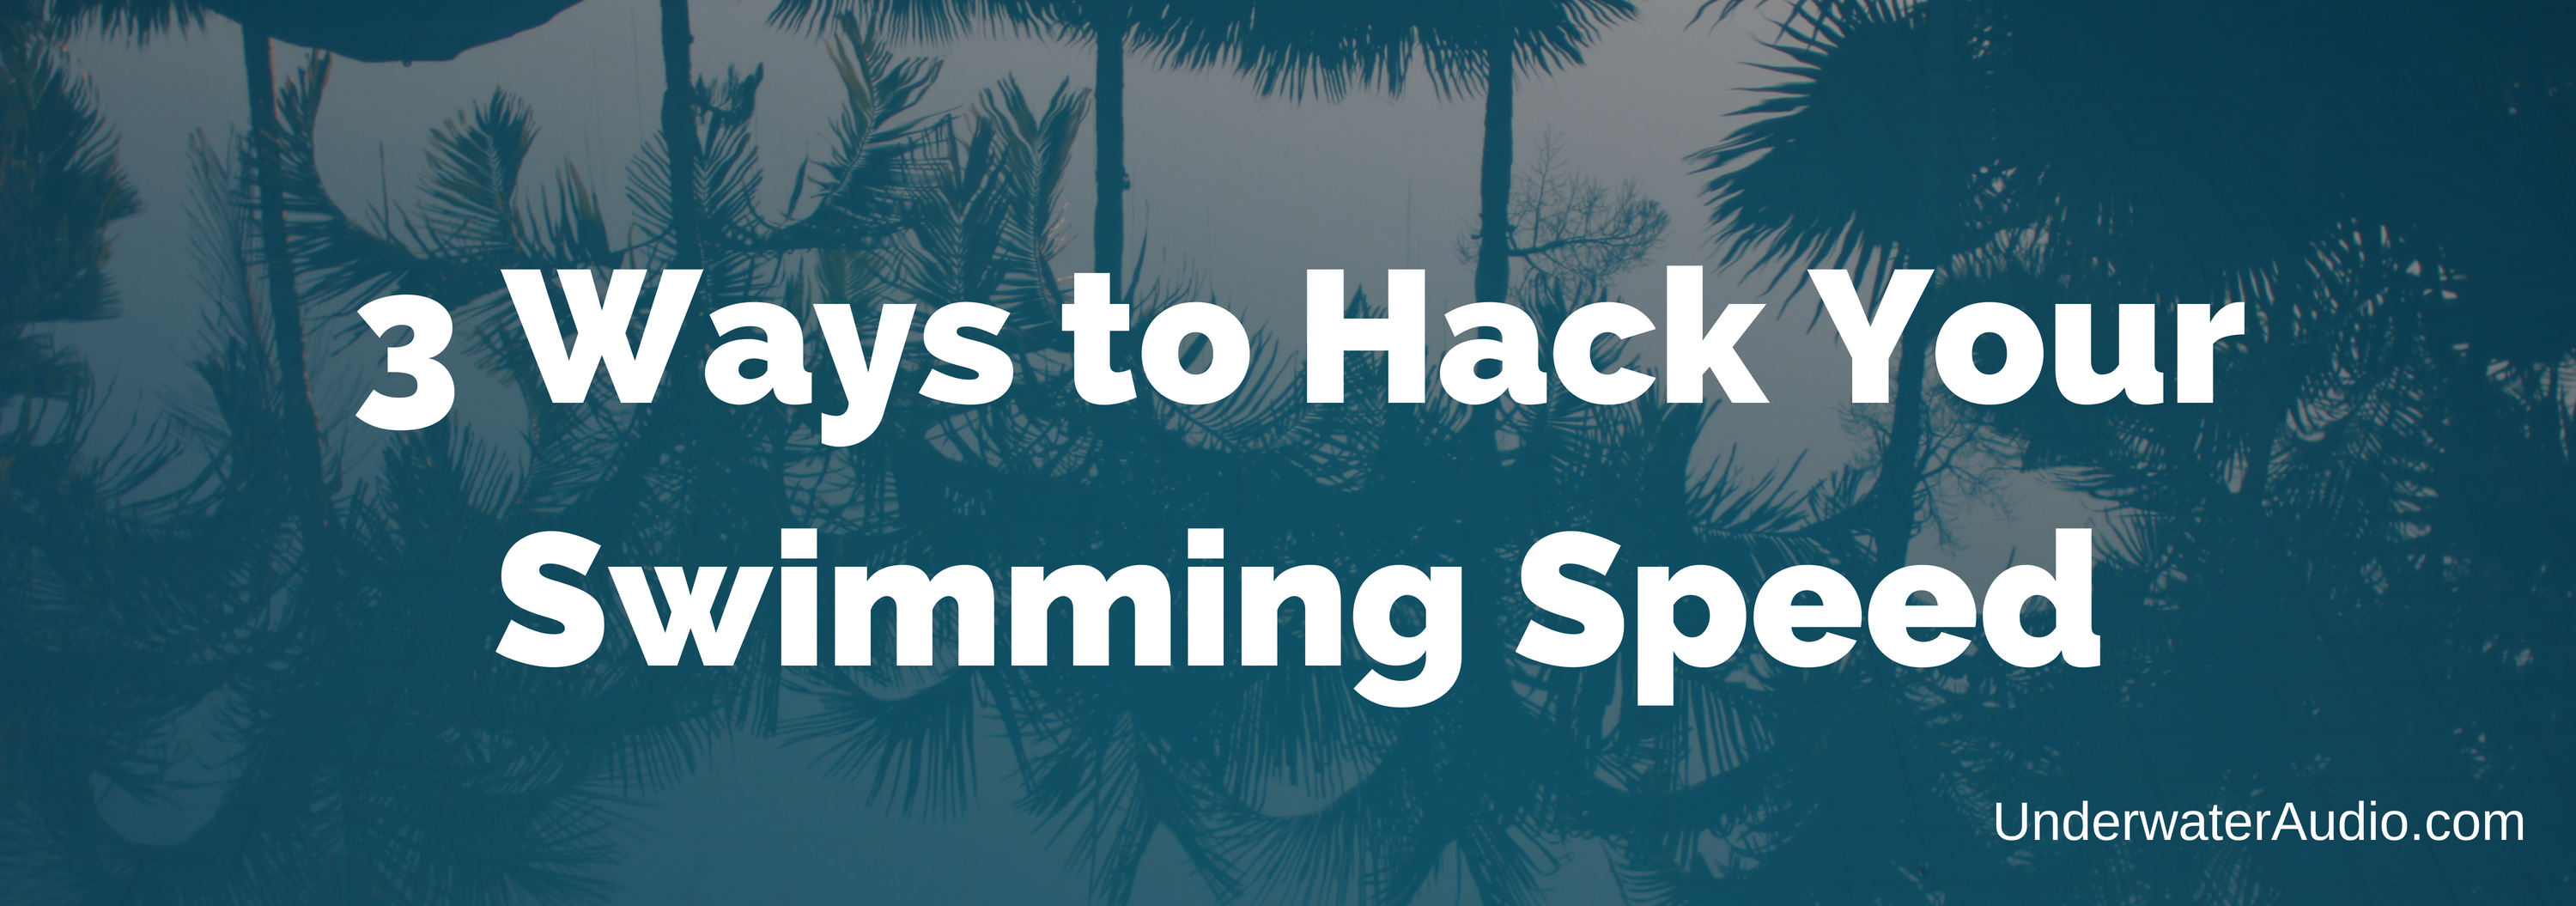 3 Ways to Hack Your Swimming Speed